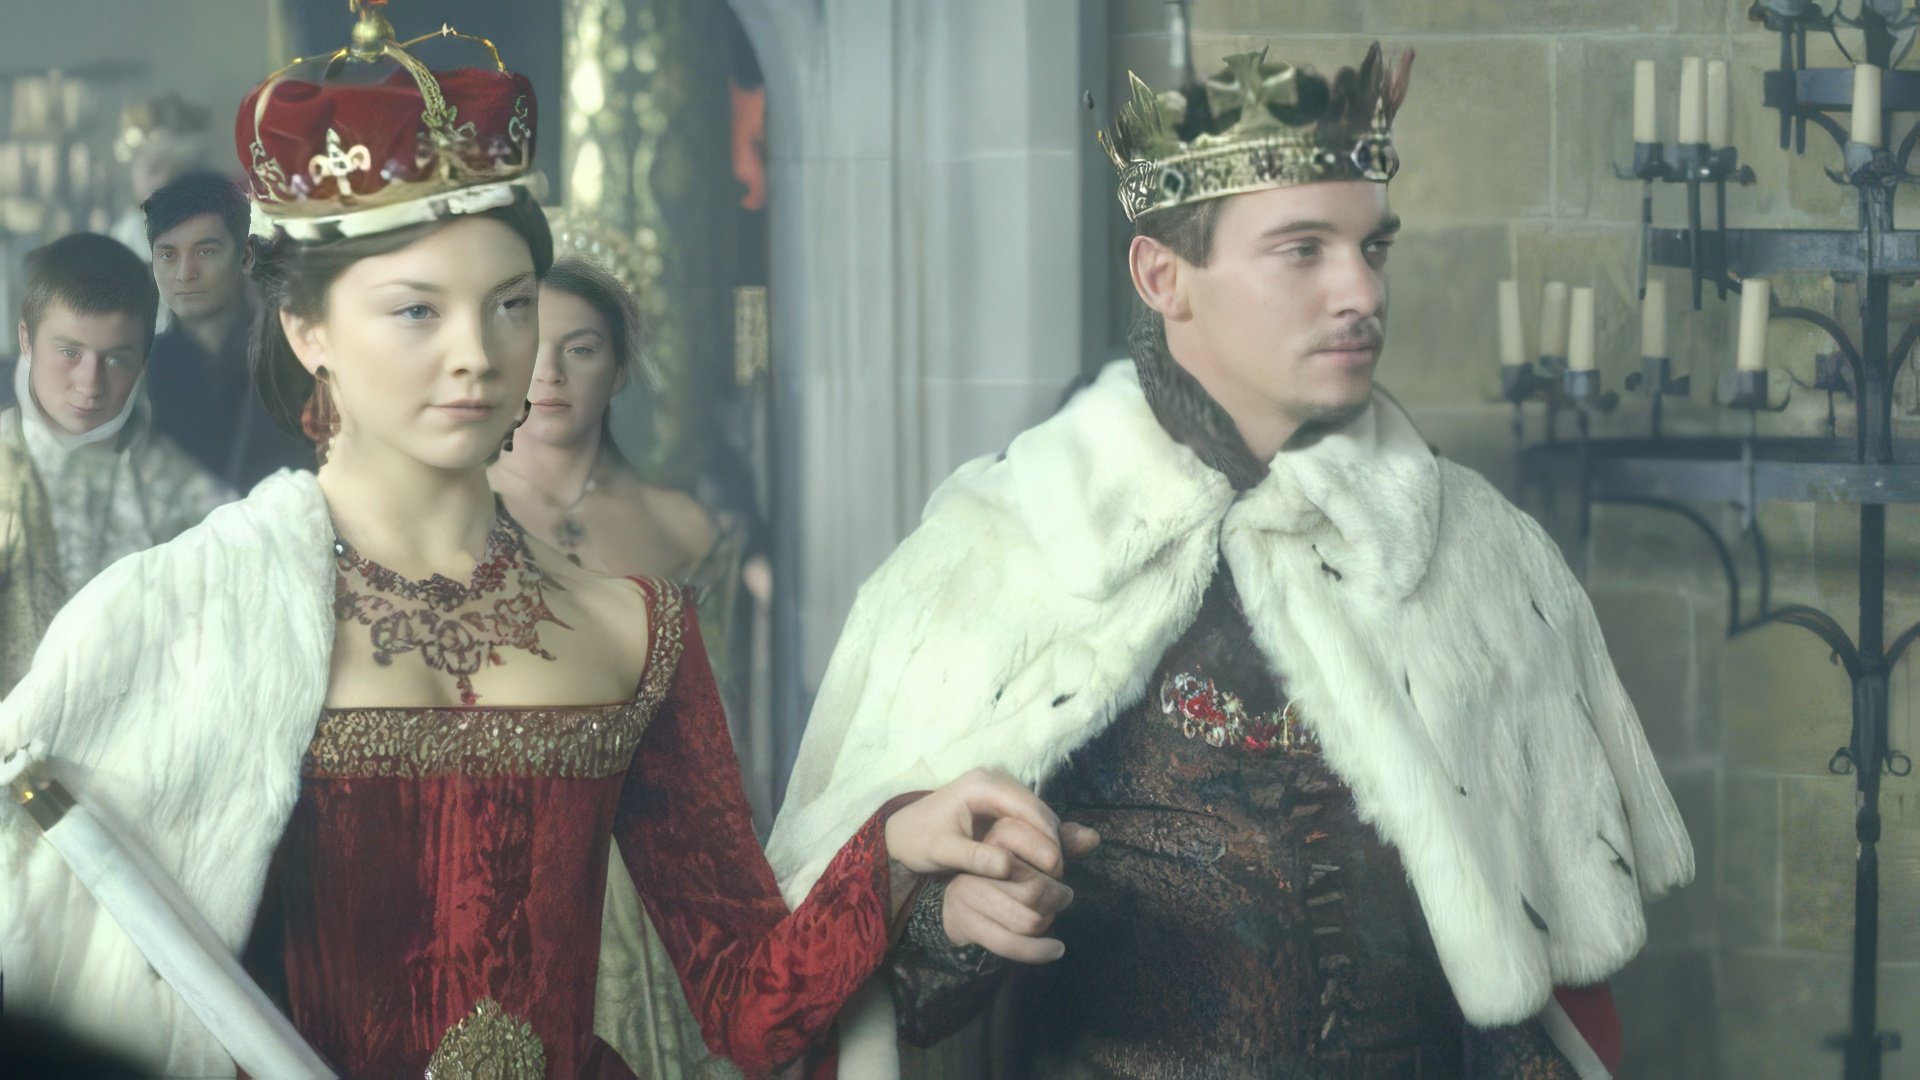 The royal wedding: Dormer and Meyers in The Tudors